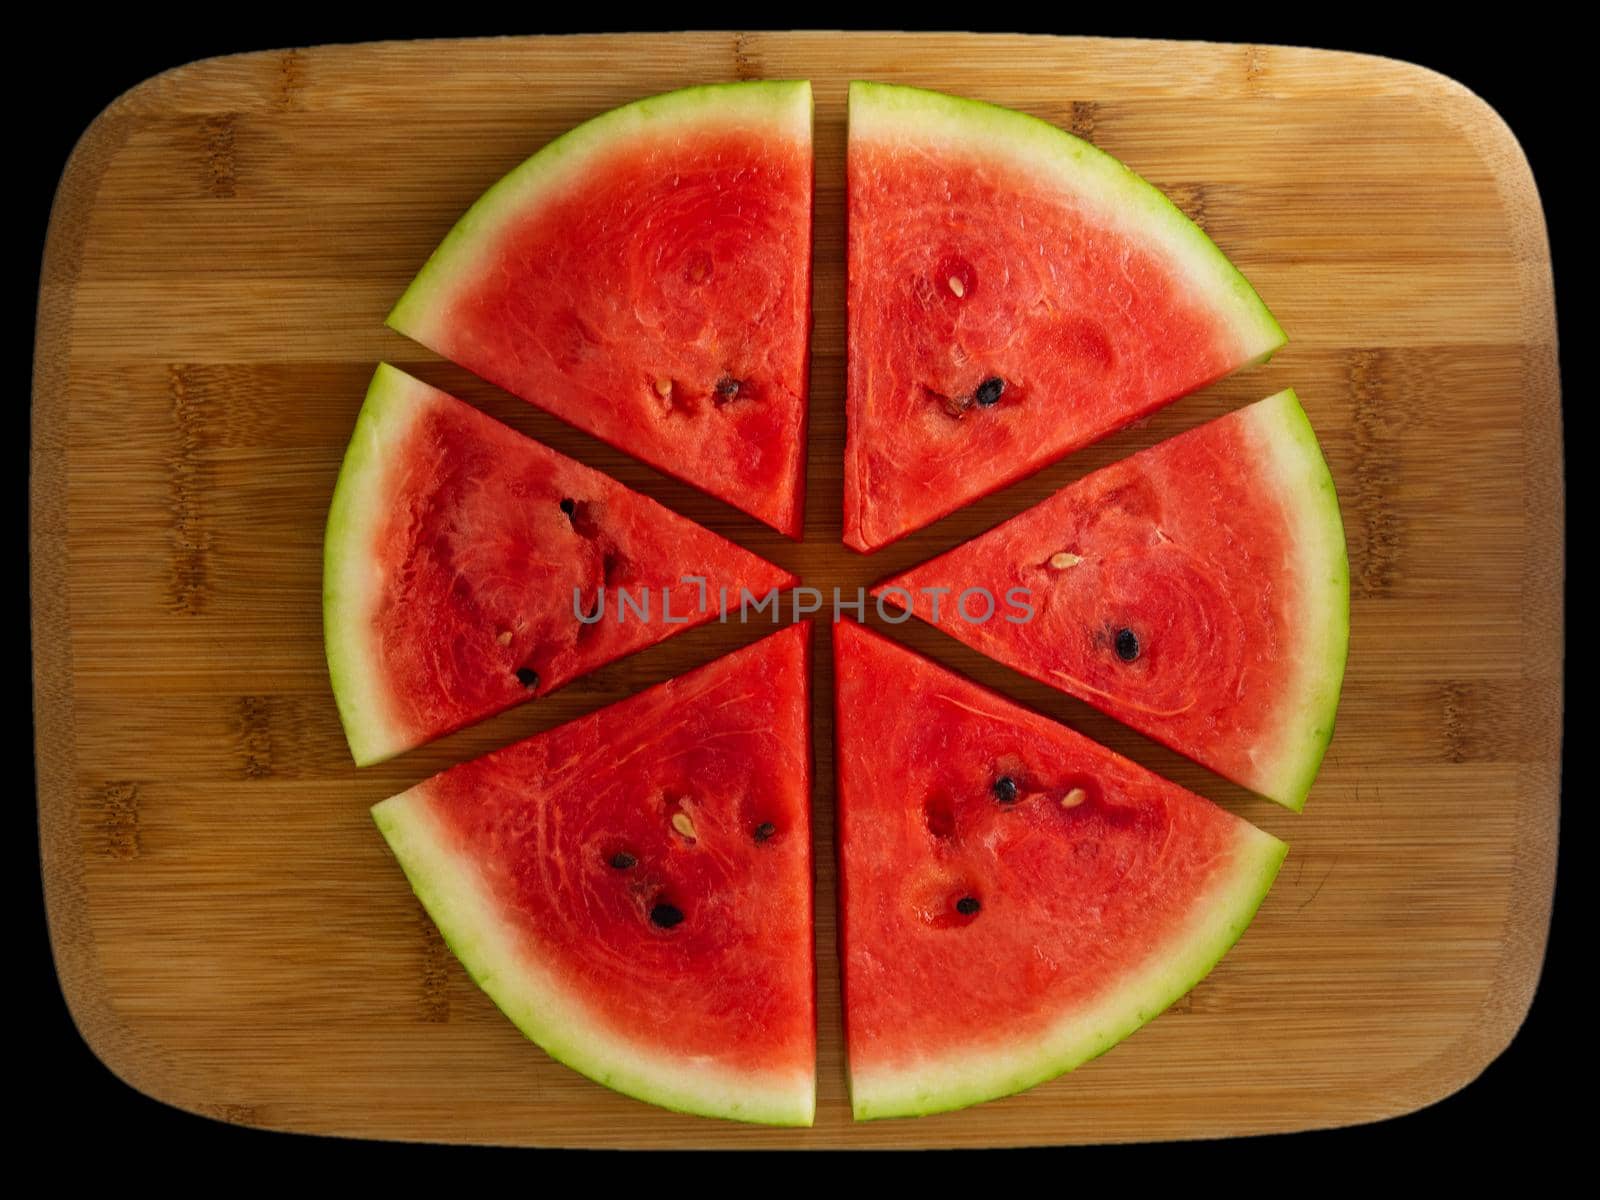 Slices of fresh red tasty watermelon laid out in a circle on a wooden background.